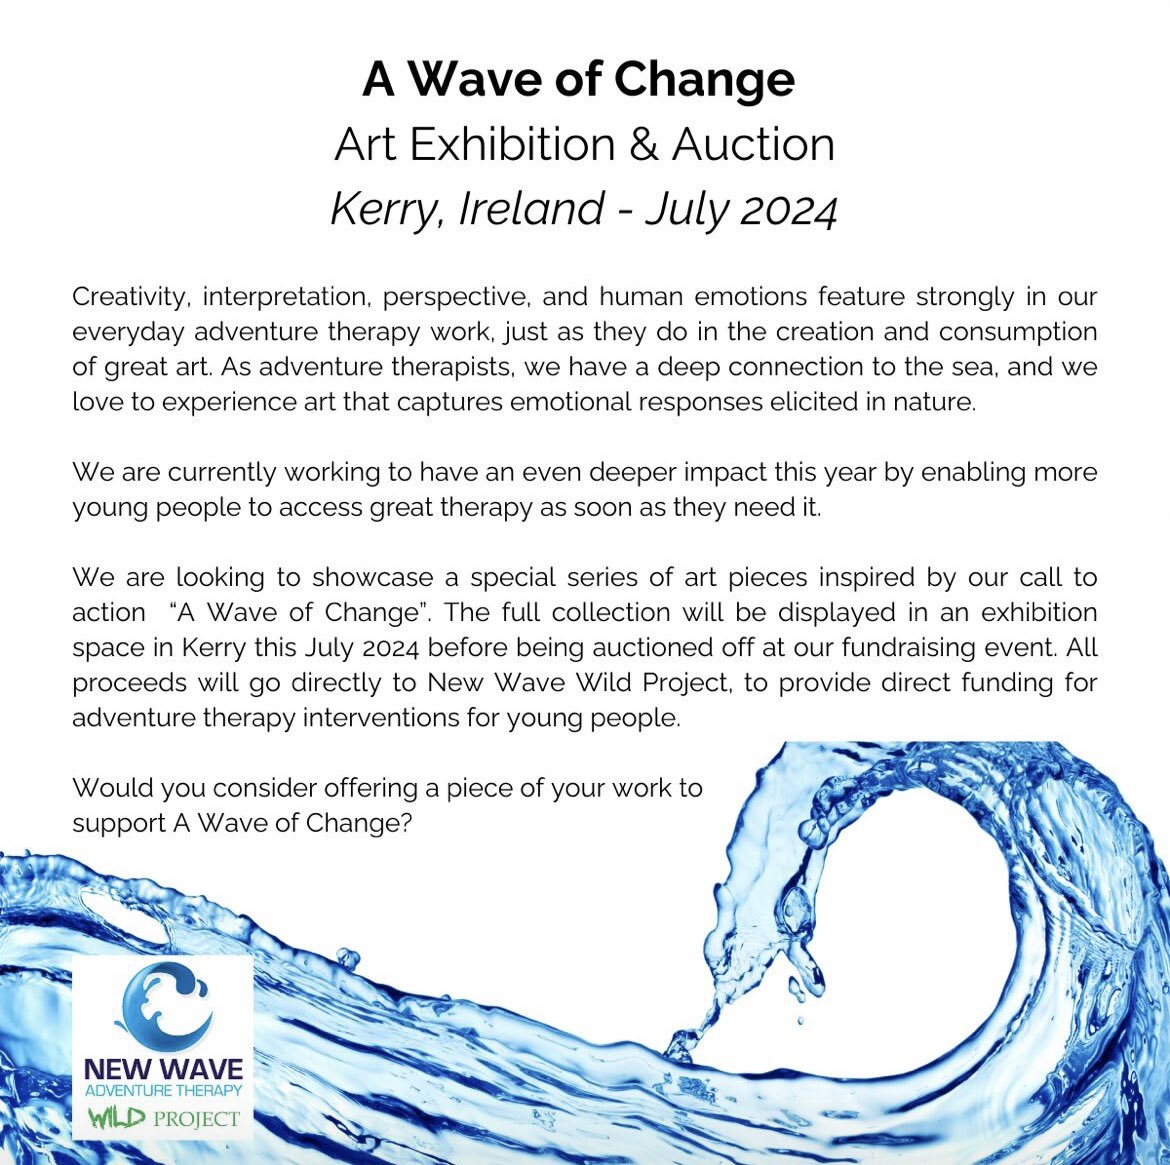 Please share! For more information contact us on info@newwavewildproject.ie or 0896008185
#adventuretherapy #nonprofit #creativepsychotherapy #creativesolutions #AWaveofChange #MentalHealth #creativeExpression #ArtExhibition #ArtAuction #creativity newwavewildproject.ie